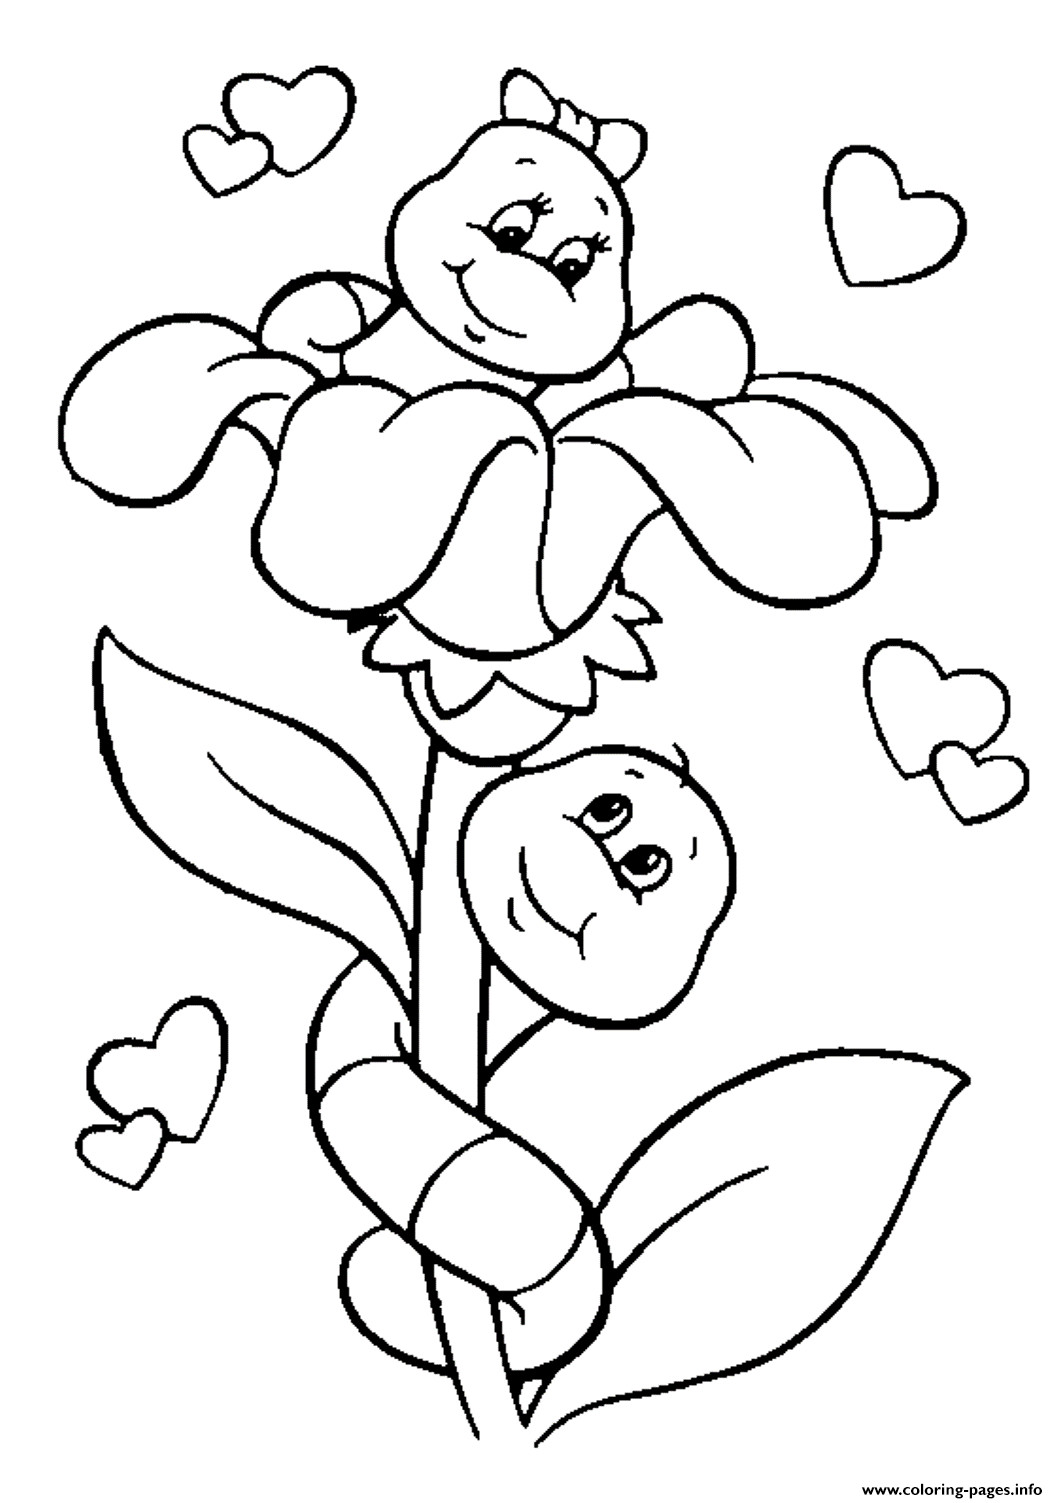 Valentines Coloring Pages For Kids
 Flower And Caterpillar In Love Valentine S9195 Coloring